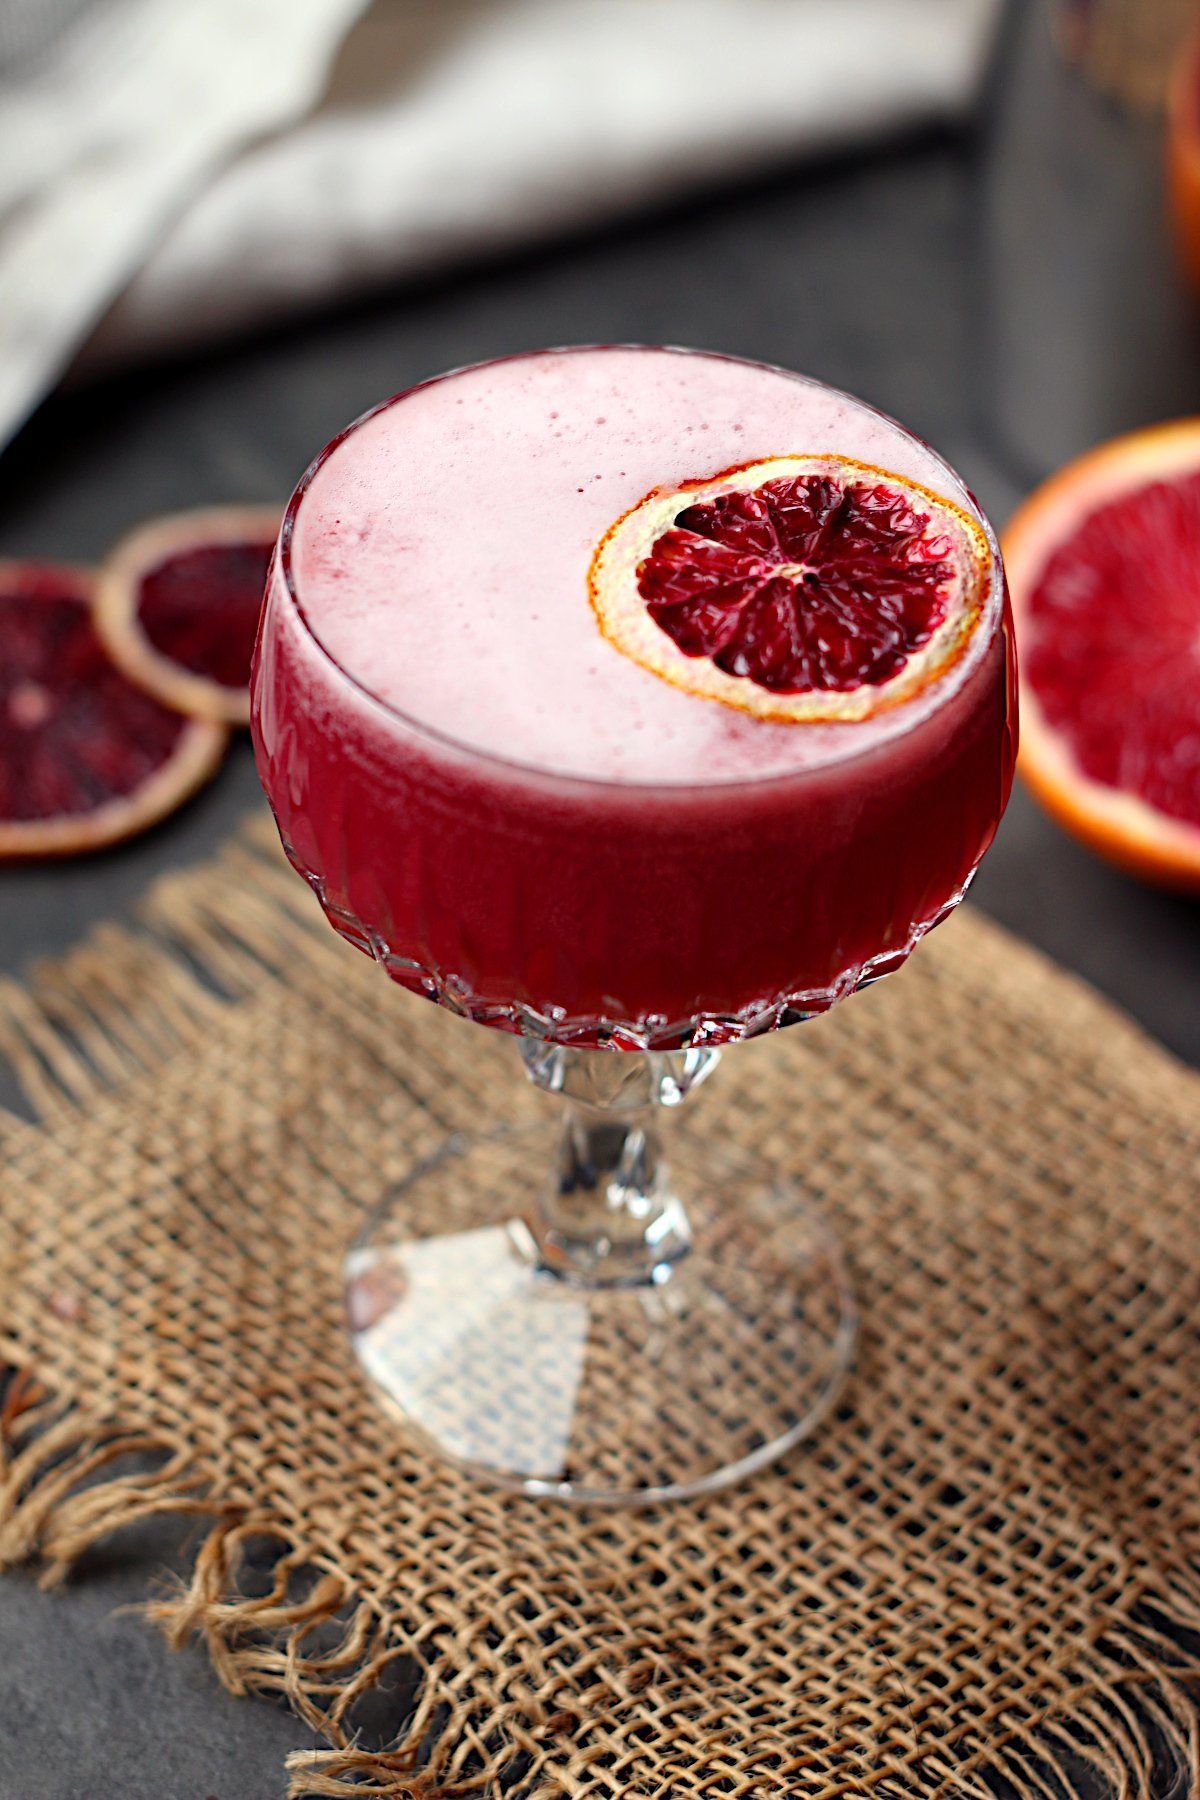 Blood orange whisky sour mocktail garnished with a dried blood orange slice in a crystal coupe glass.